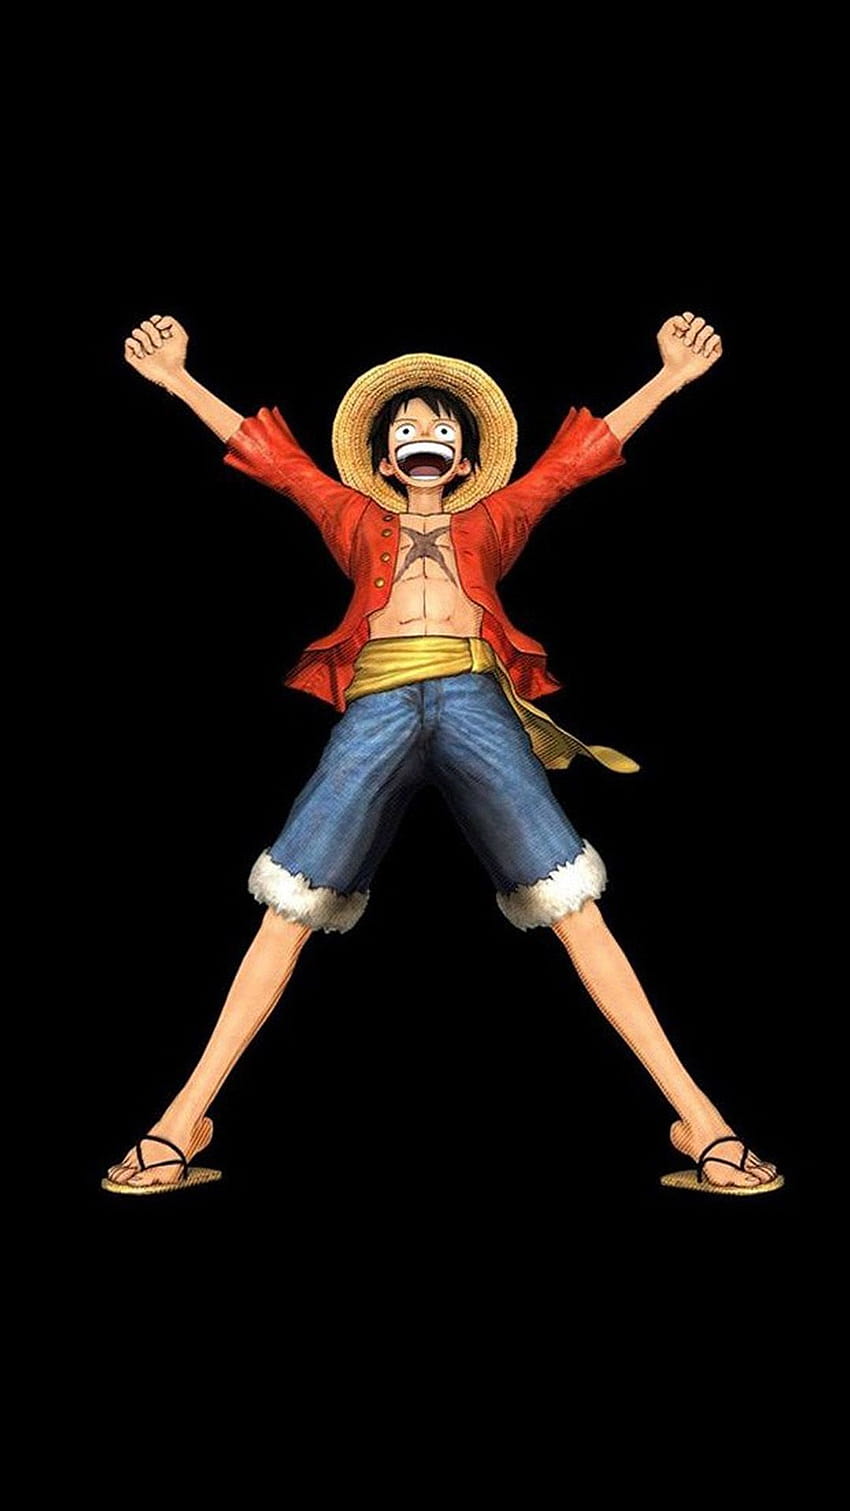 Luffy One Piece Anime For Mobile Pho, luffy mobile HD phone wallpaper